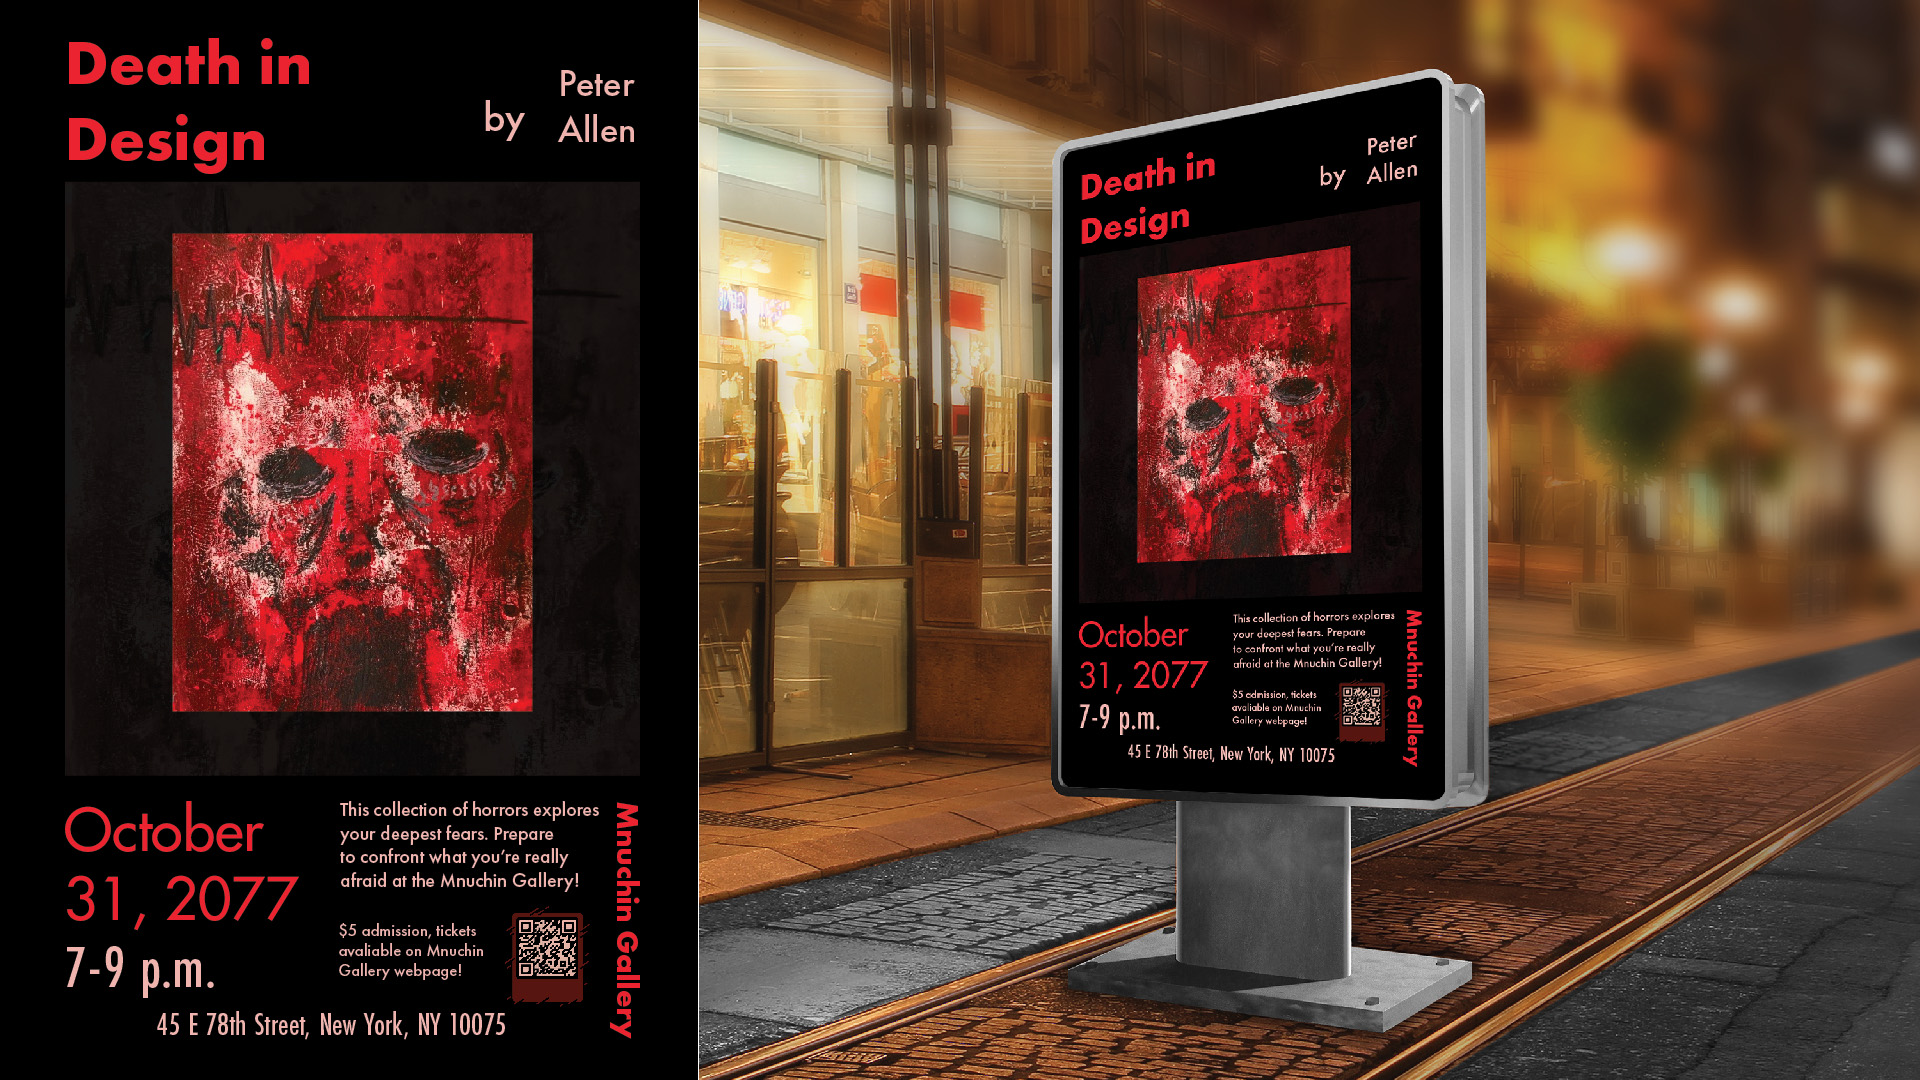 Death in Design / Death in Design, art exhibition poster, 17 x 11 inches print, 2023. This poster advertises a hypothetical art exhibition showcasing my print work.